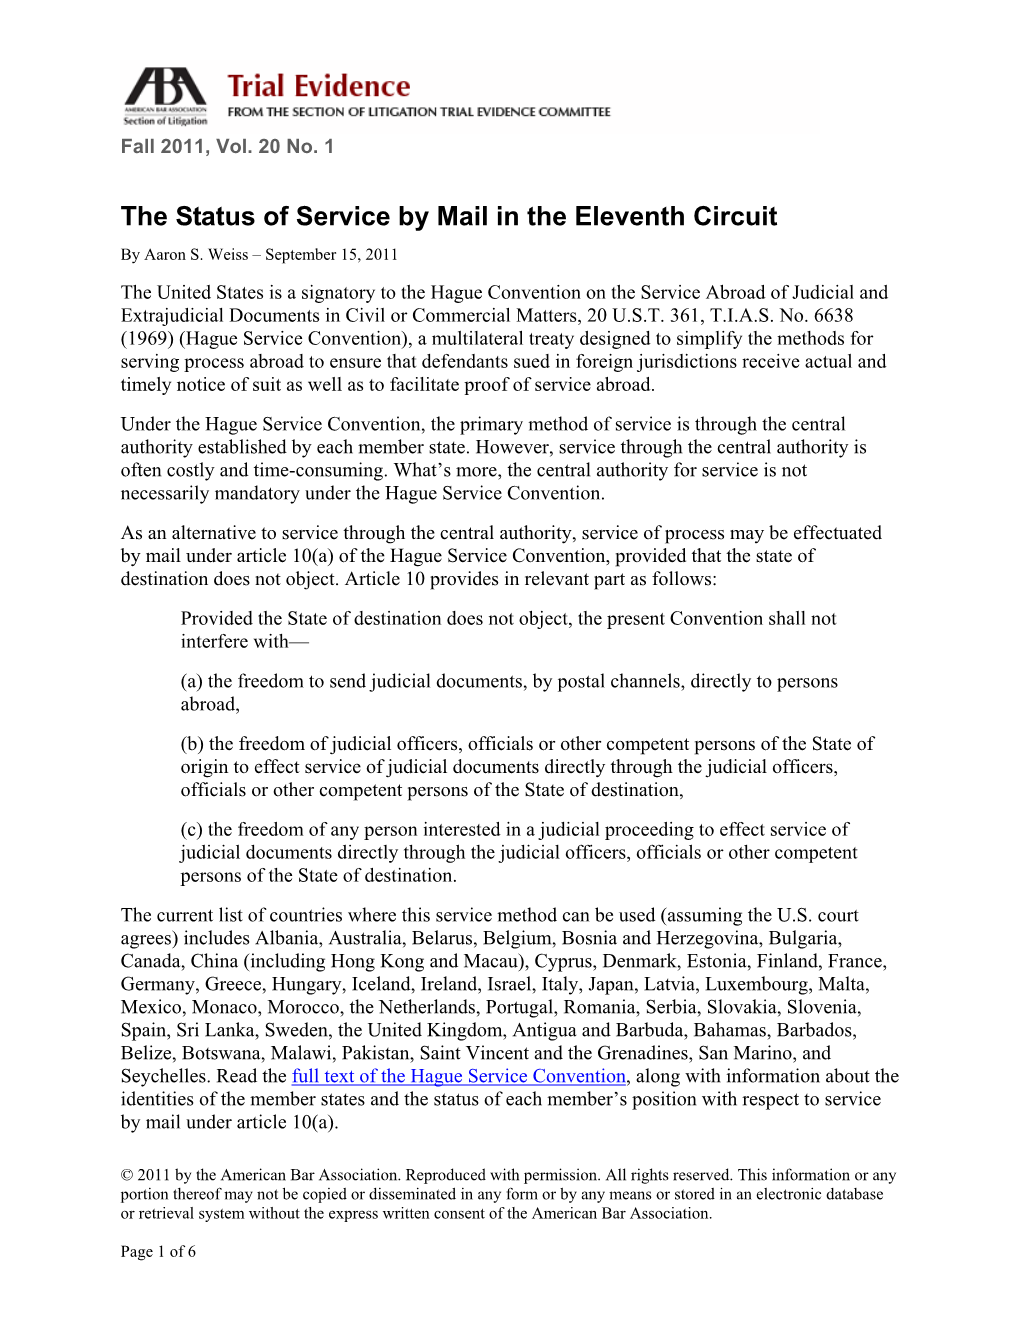 The Status of Service by Mail in the Eleventh Circuit by Aaron S